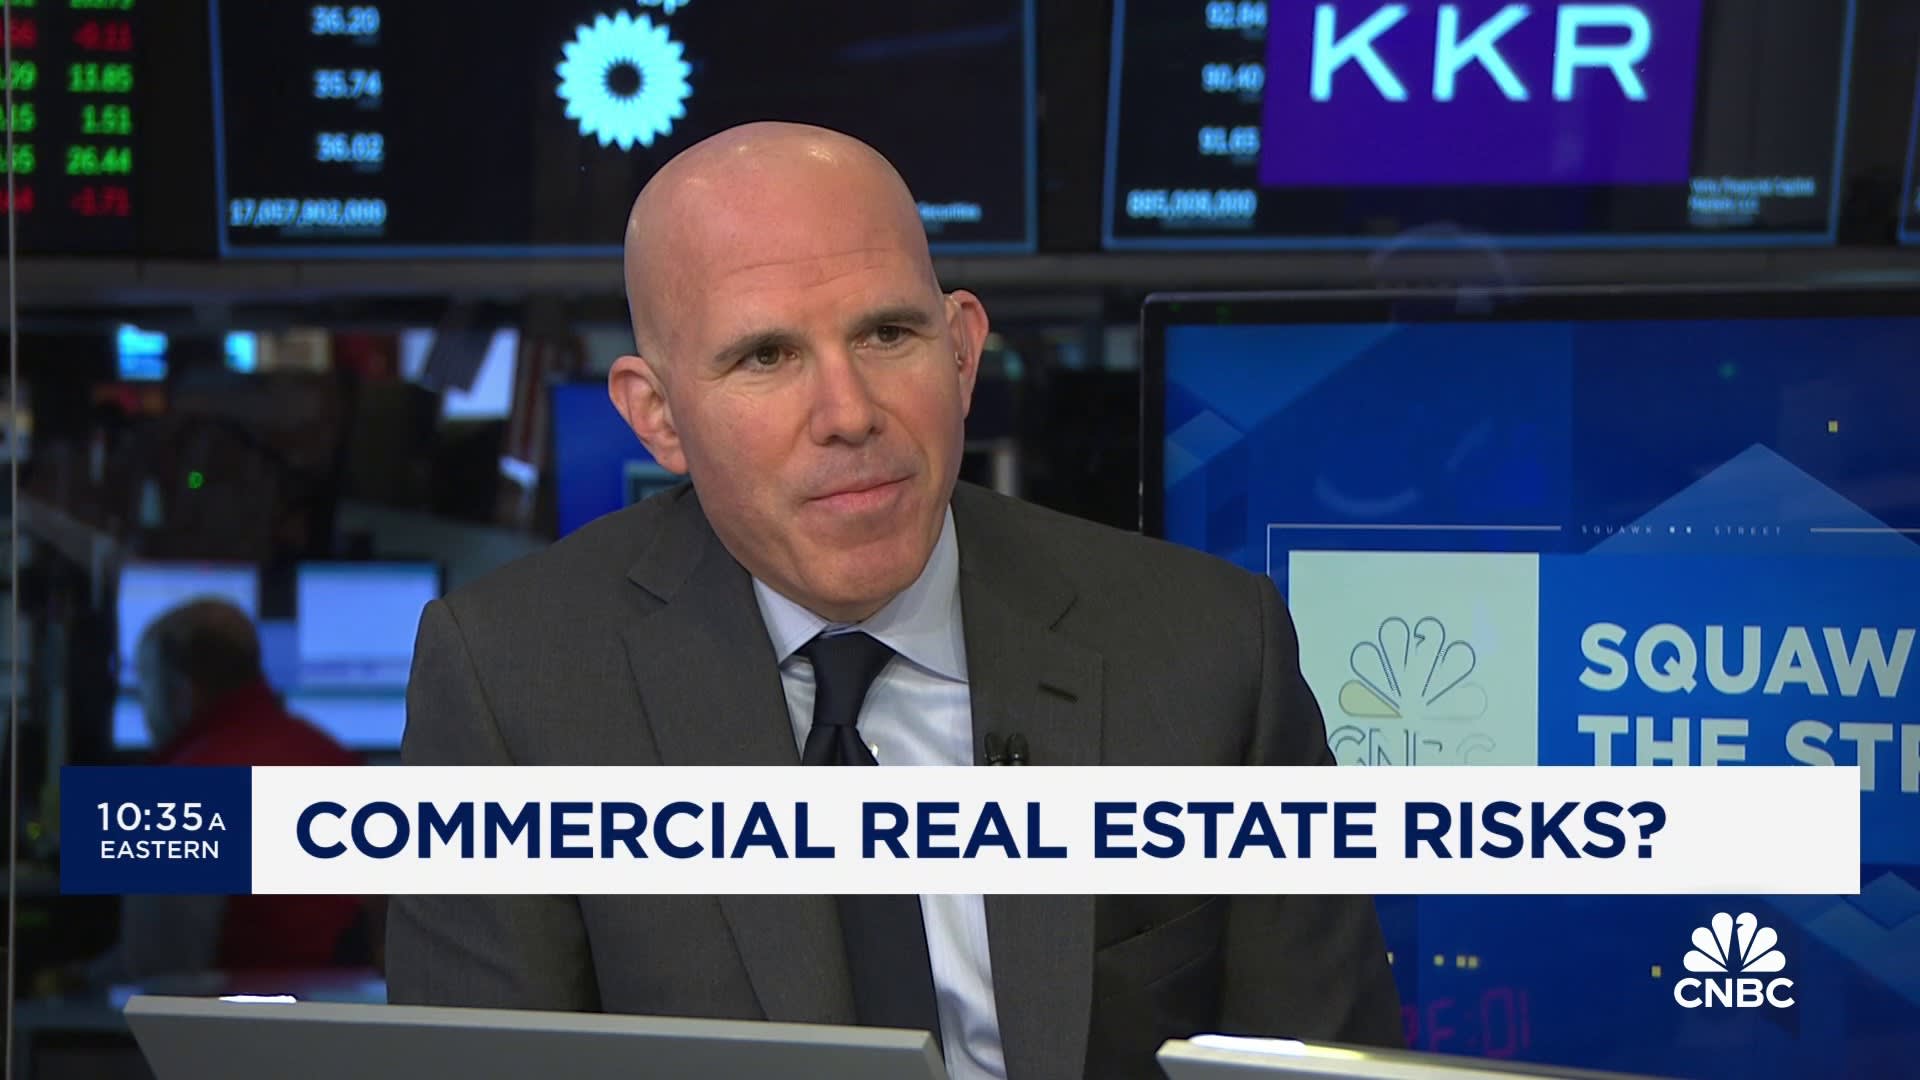 RXR CEO on commercial real estate risks